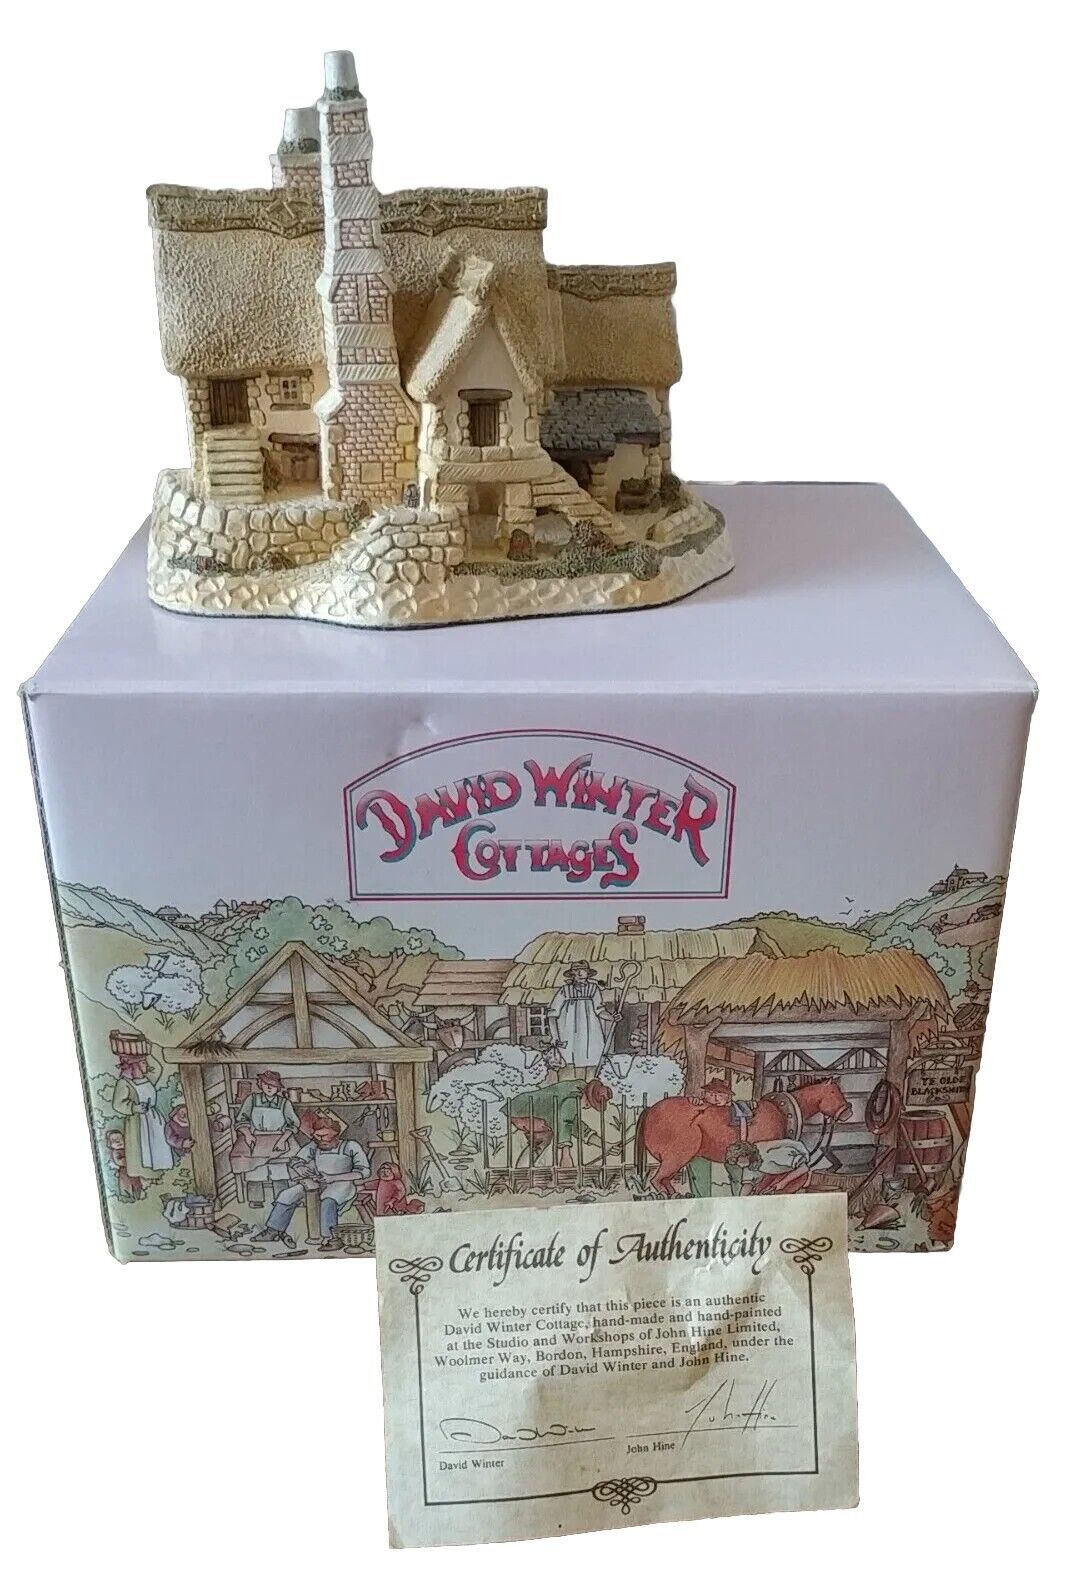 1986 David Winter Cottages West Country Collection Devon Creamery In Box W/ COA